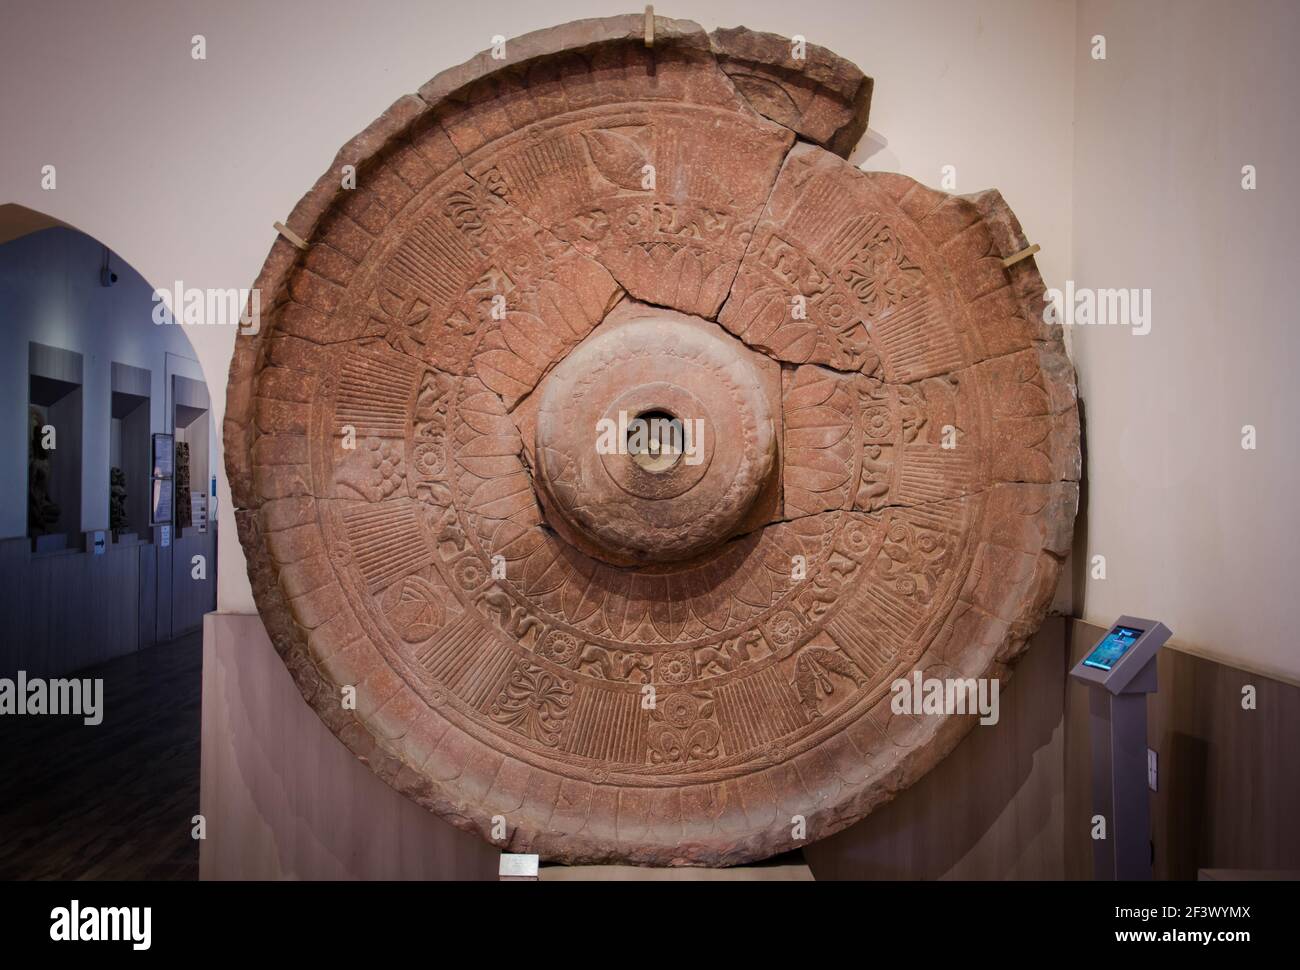 Wheel of Stone found in Archaeological excavation Stock Photo